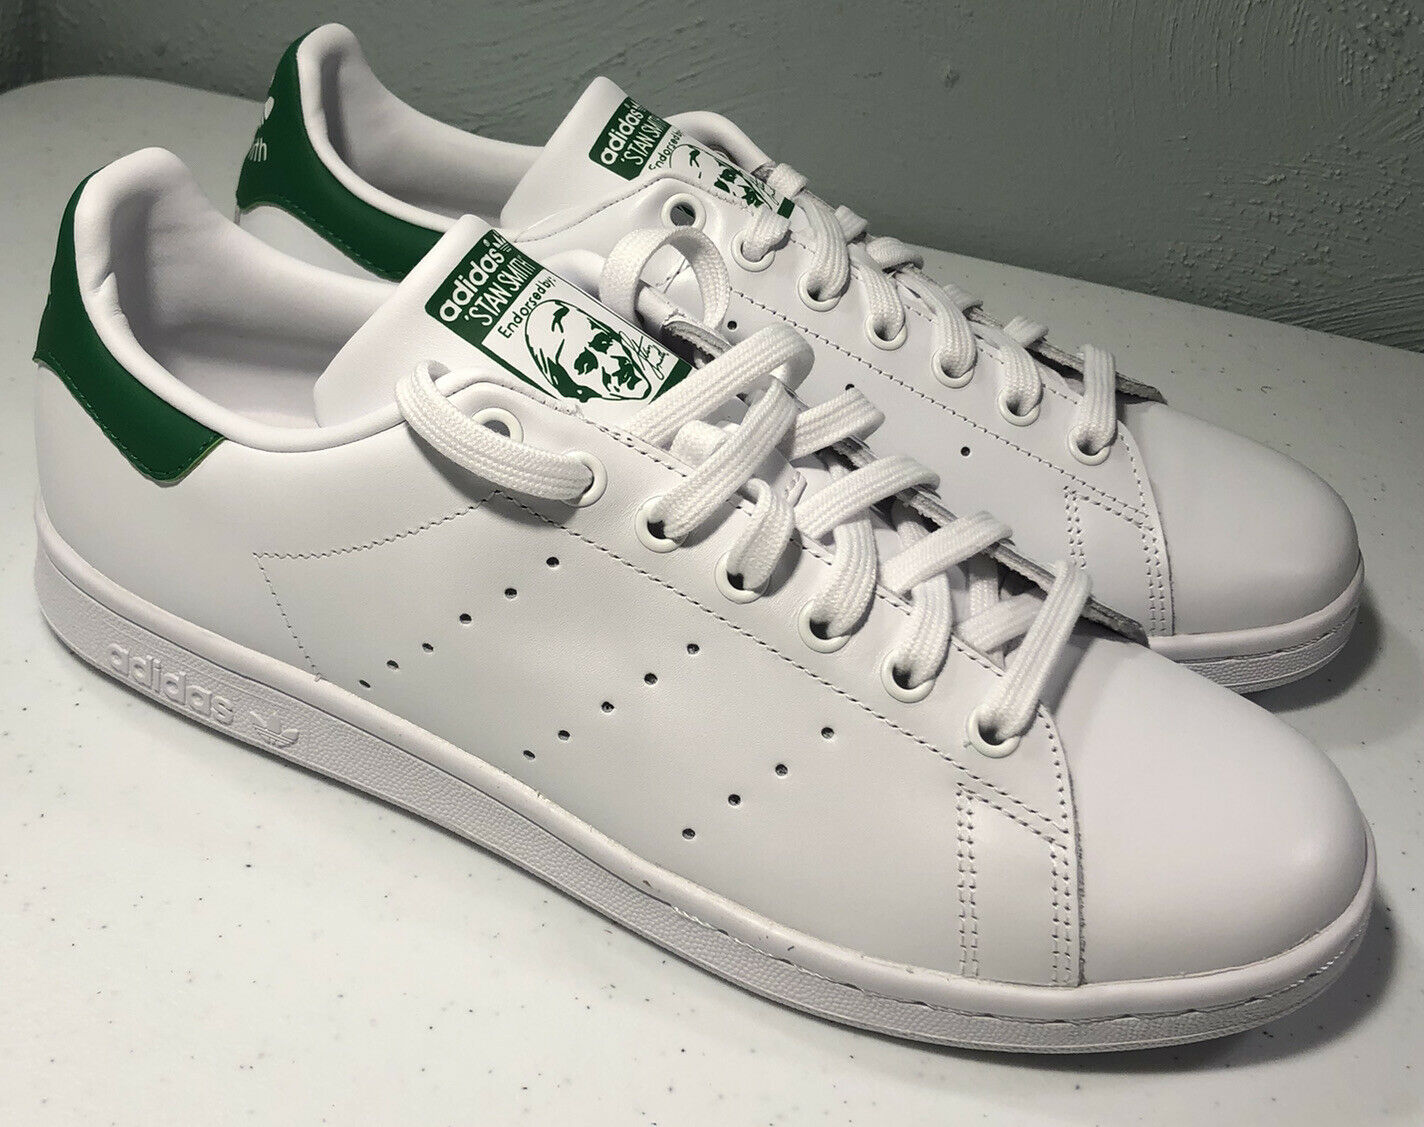 Adidas Originals Shoes Stan Smith White Fairway Green Sneakers US 9.5 / M20324